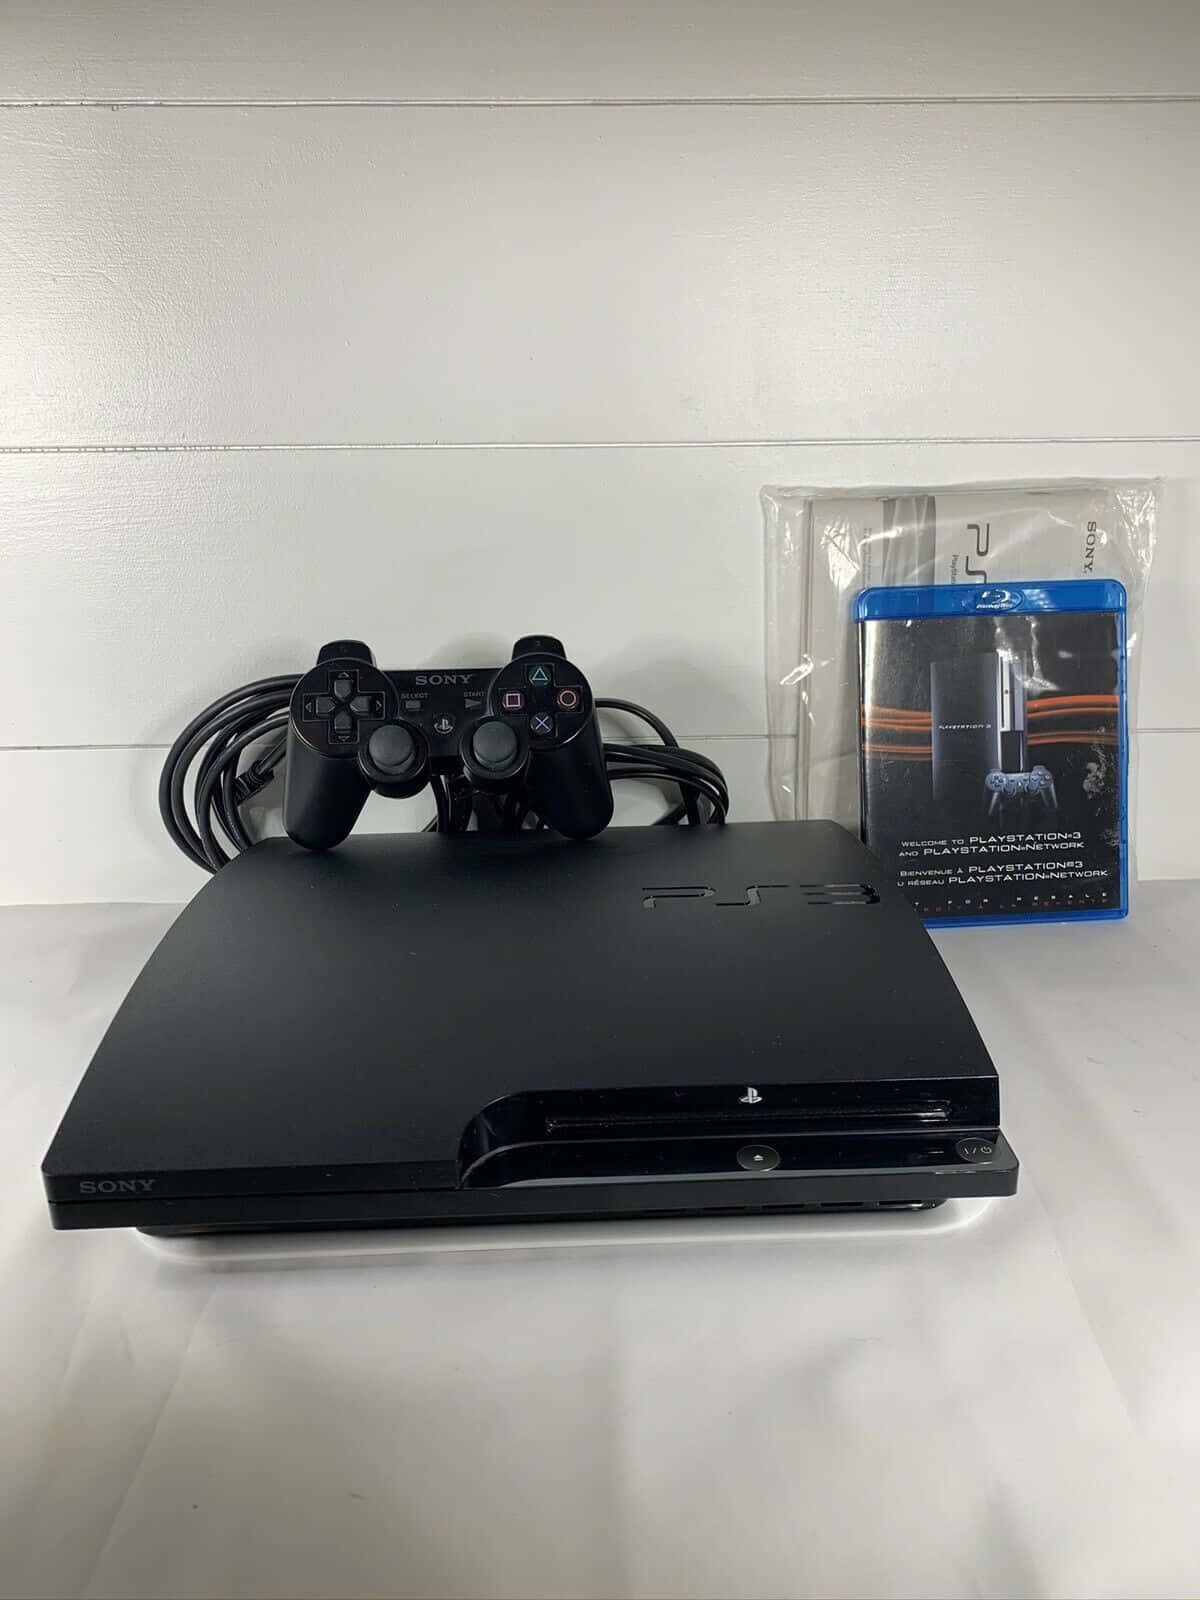 Experience gaming on the next level with the Playstation